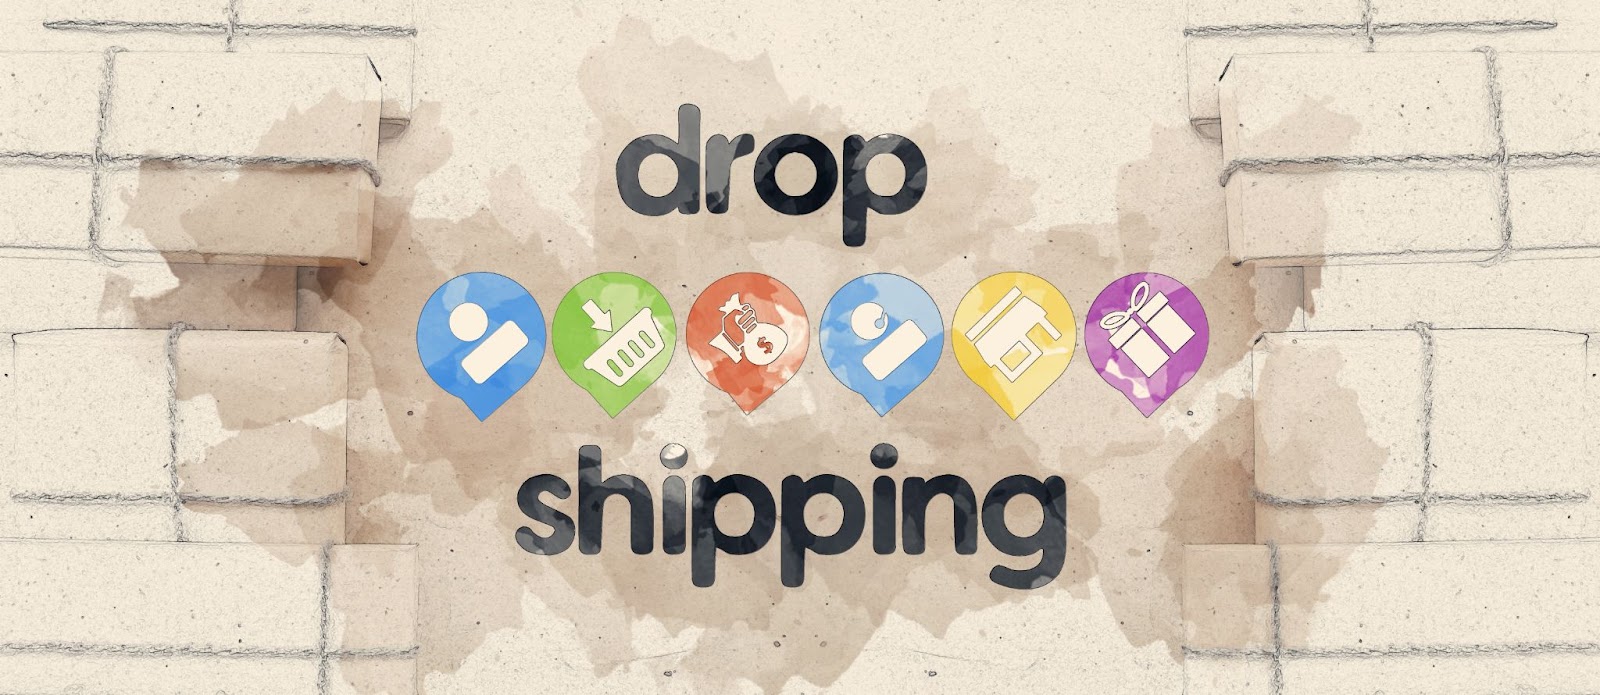 How do dropshipping products work?